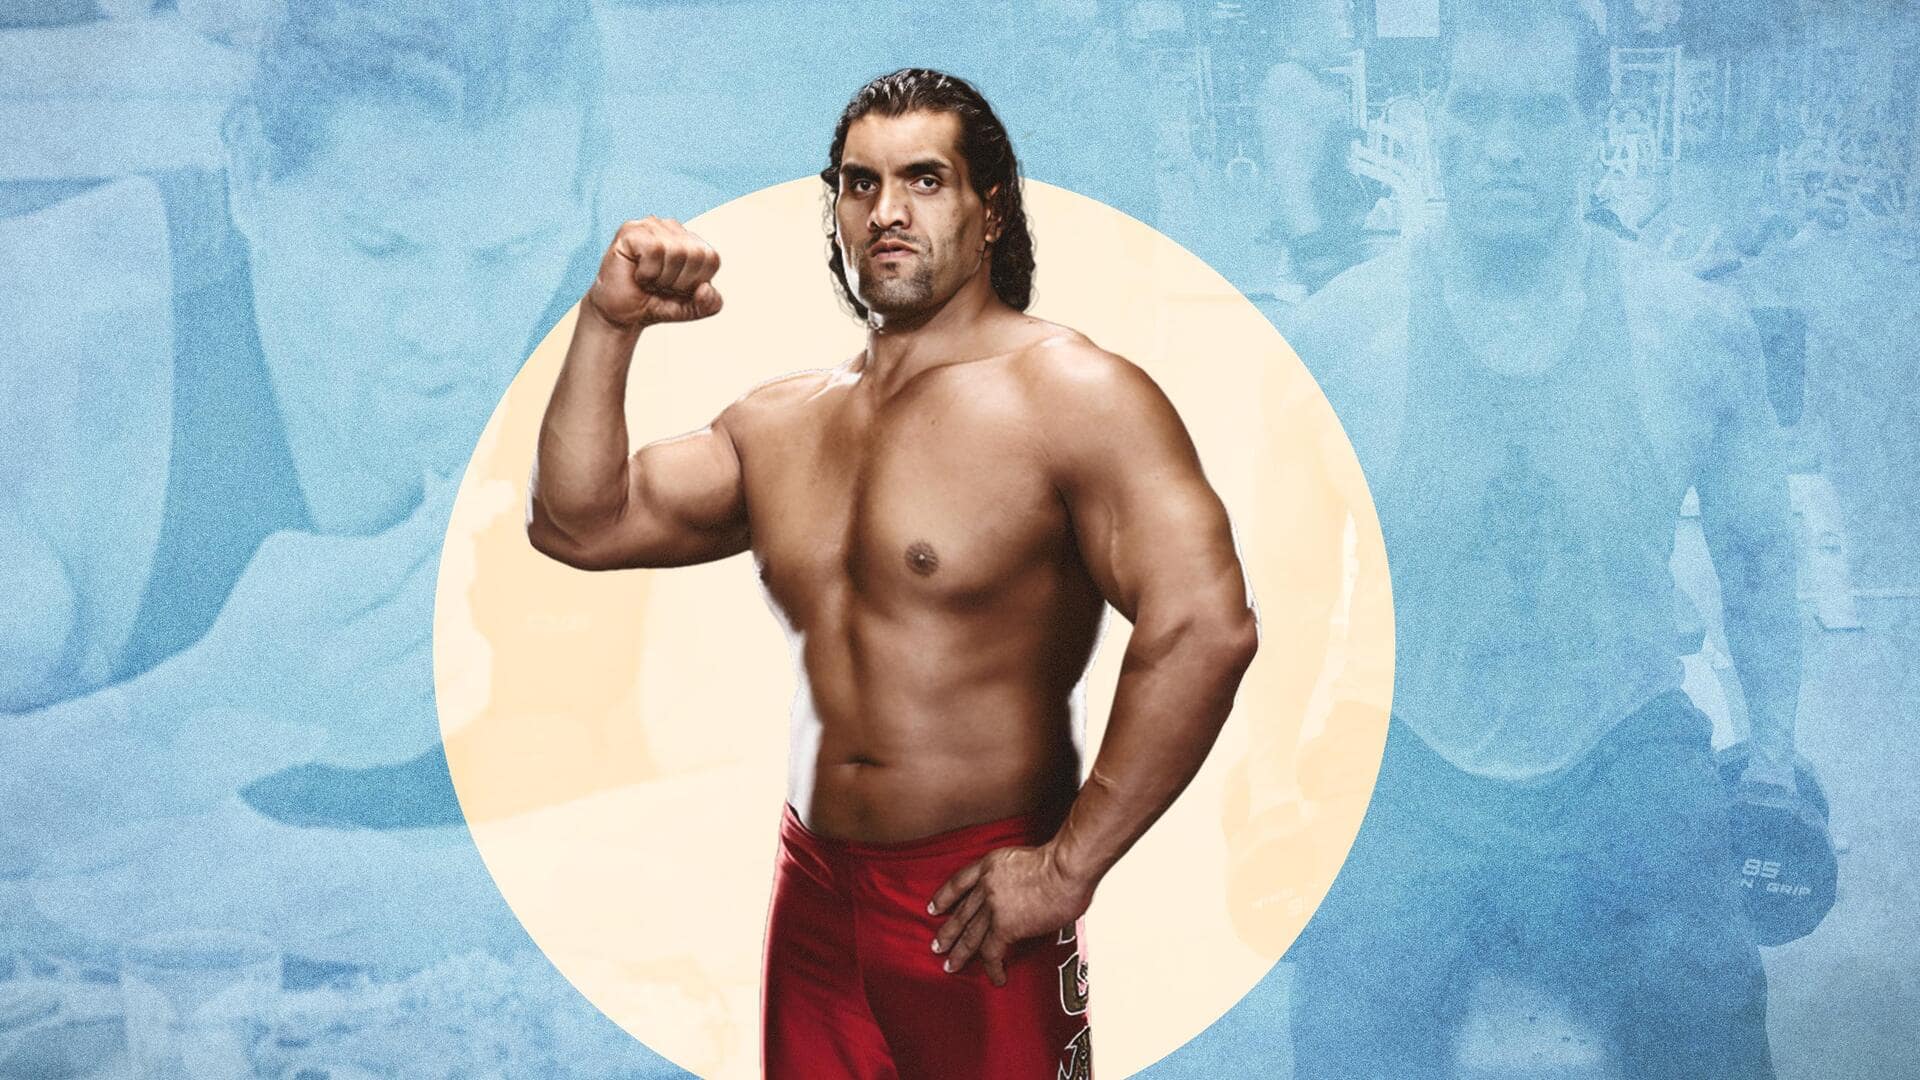 Happy birthday, The Great Khali! Here's how he stays fit